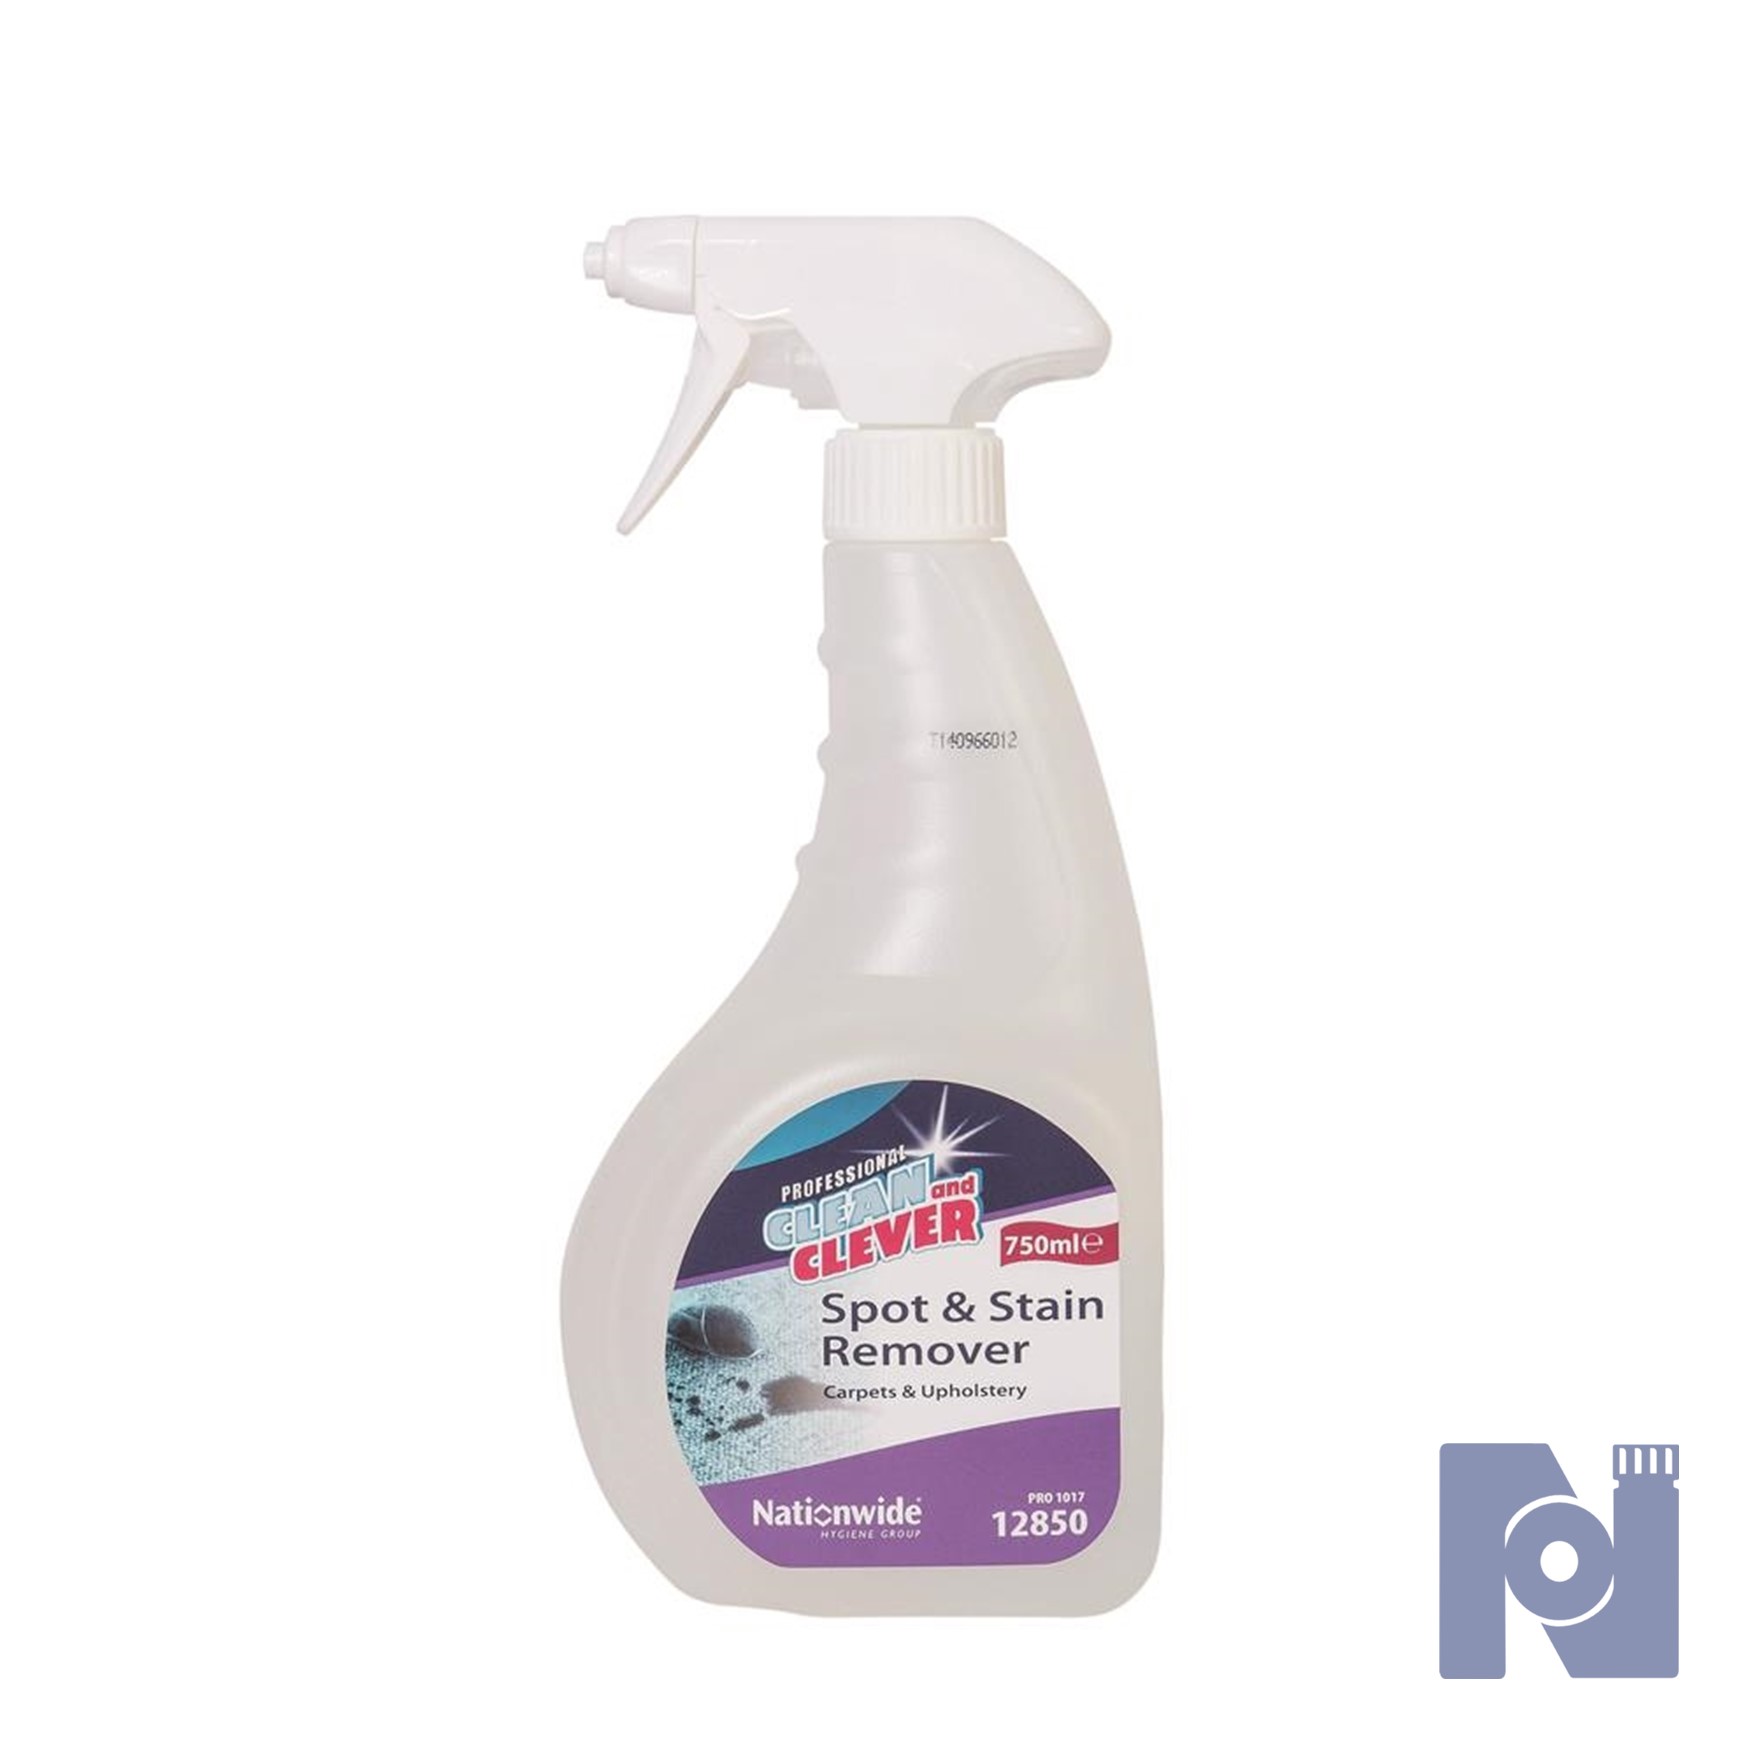 Clean & Clever Spot & Stain Remover